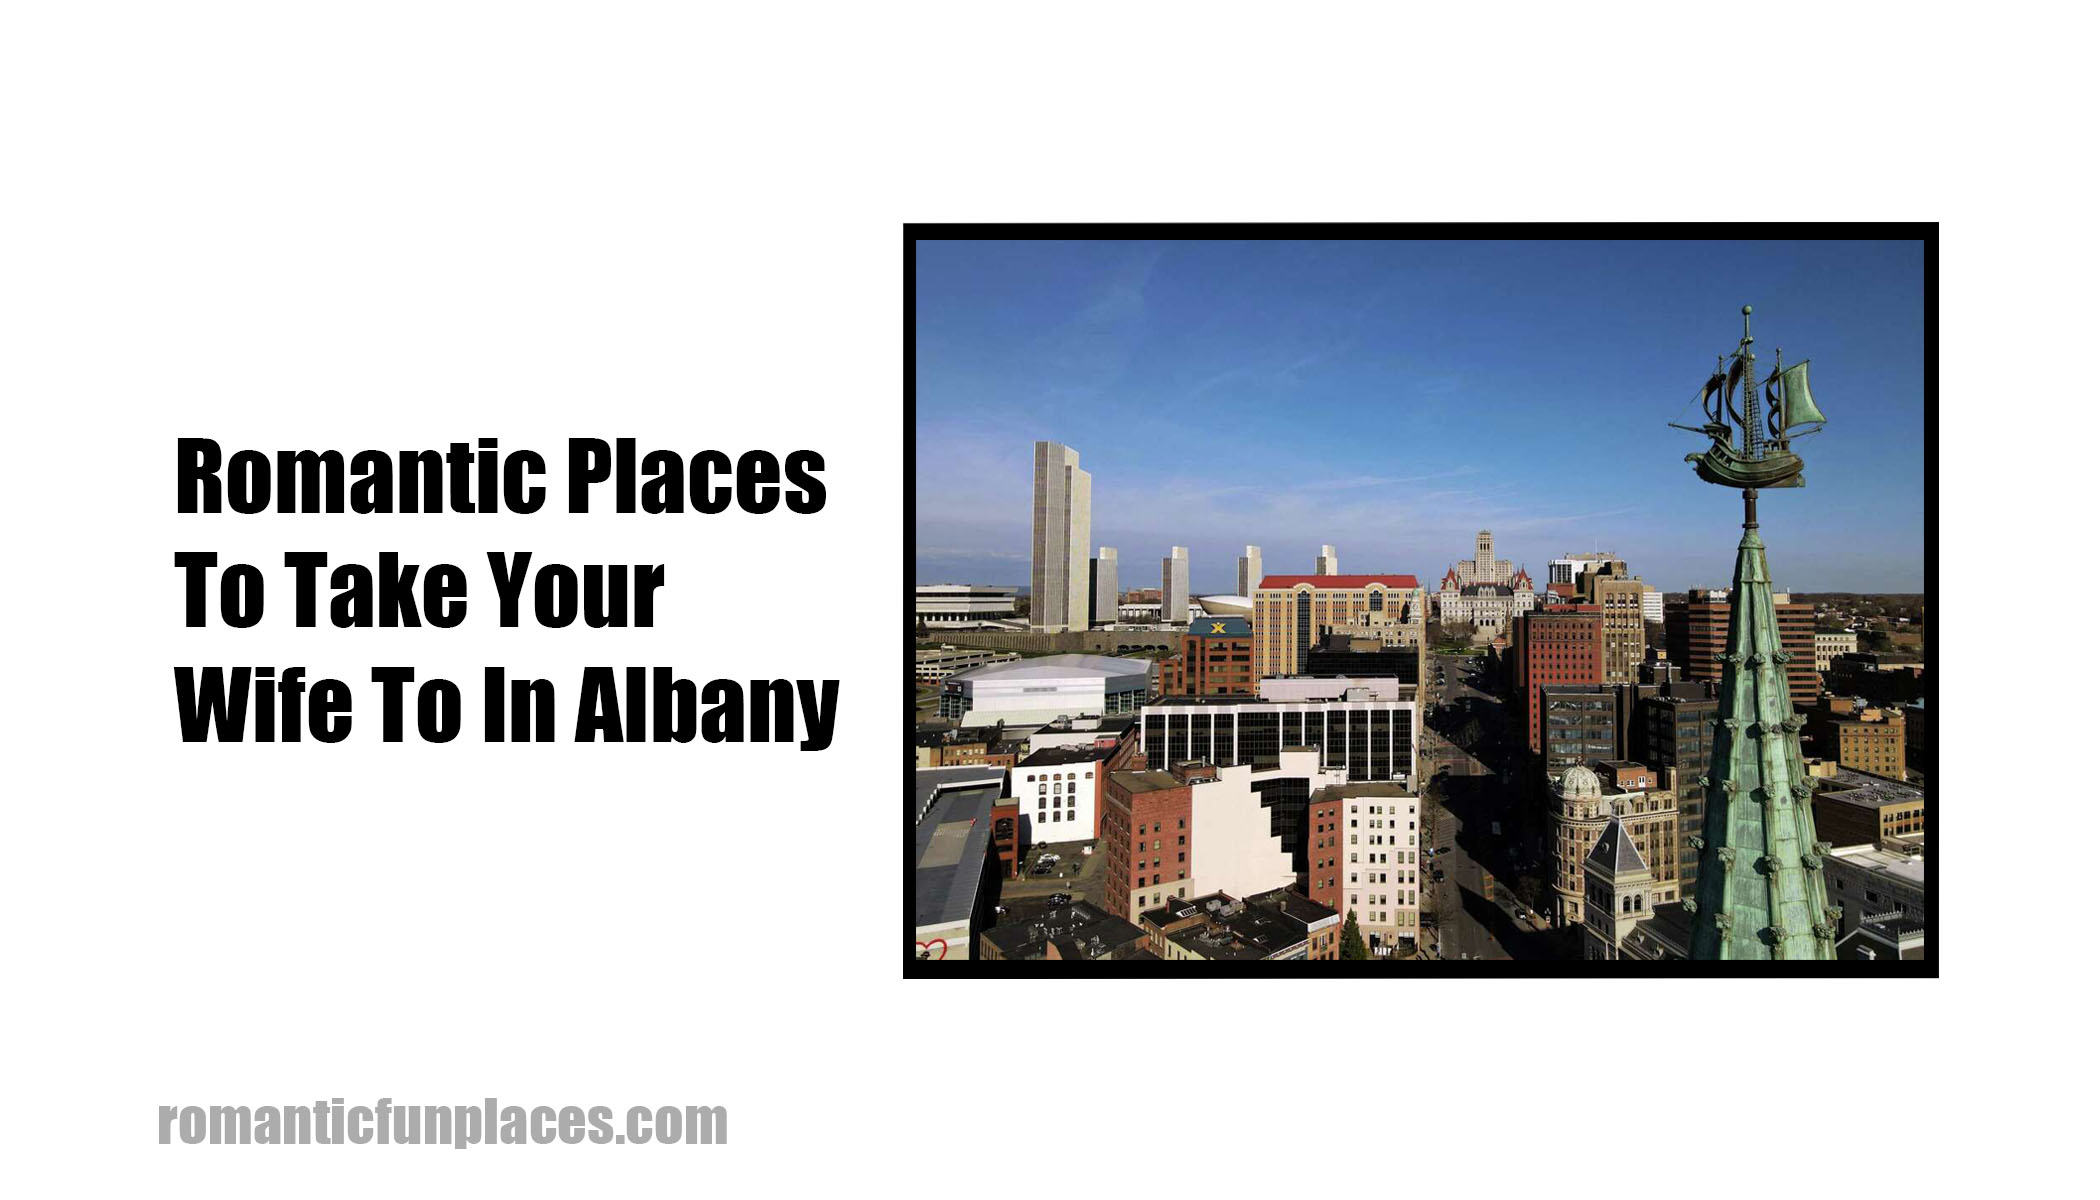 Romantic Places To Take Your Wife To In Albany